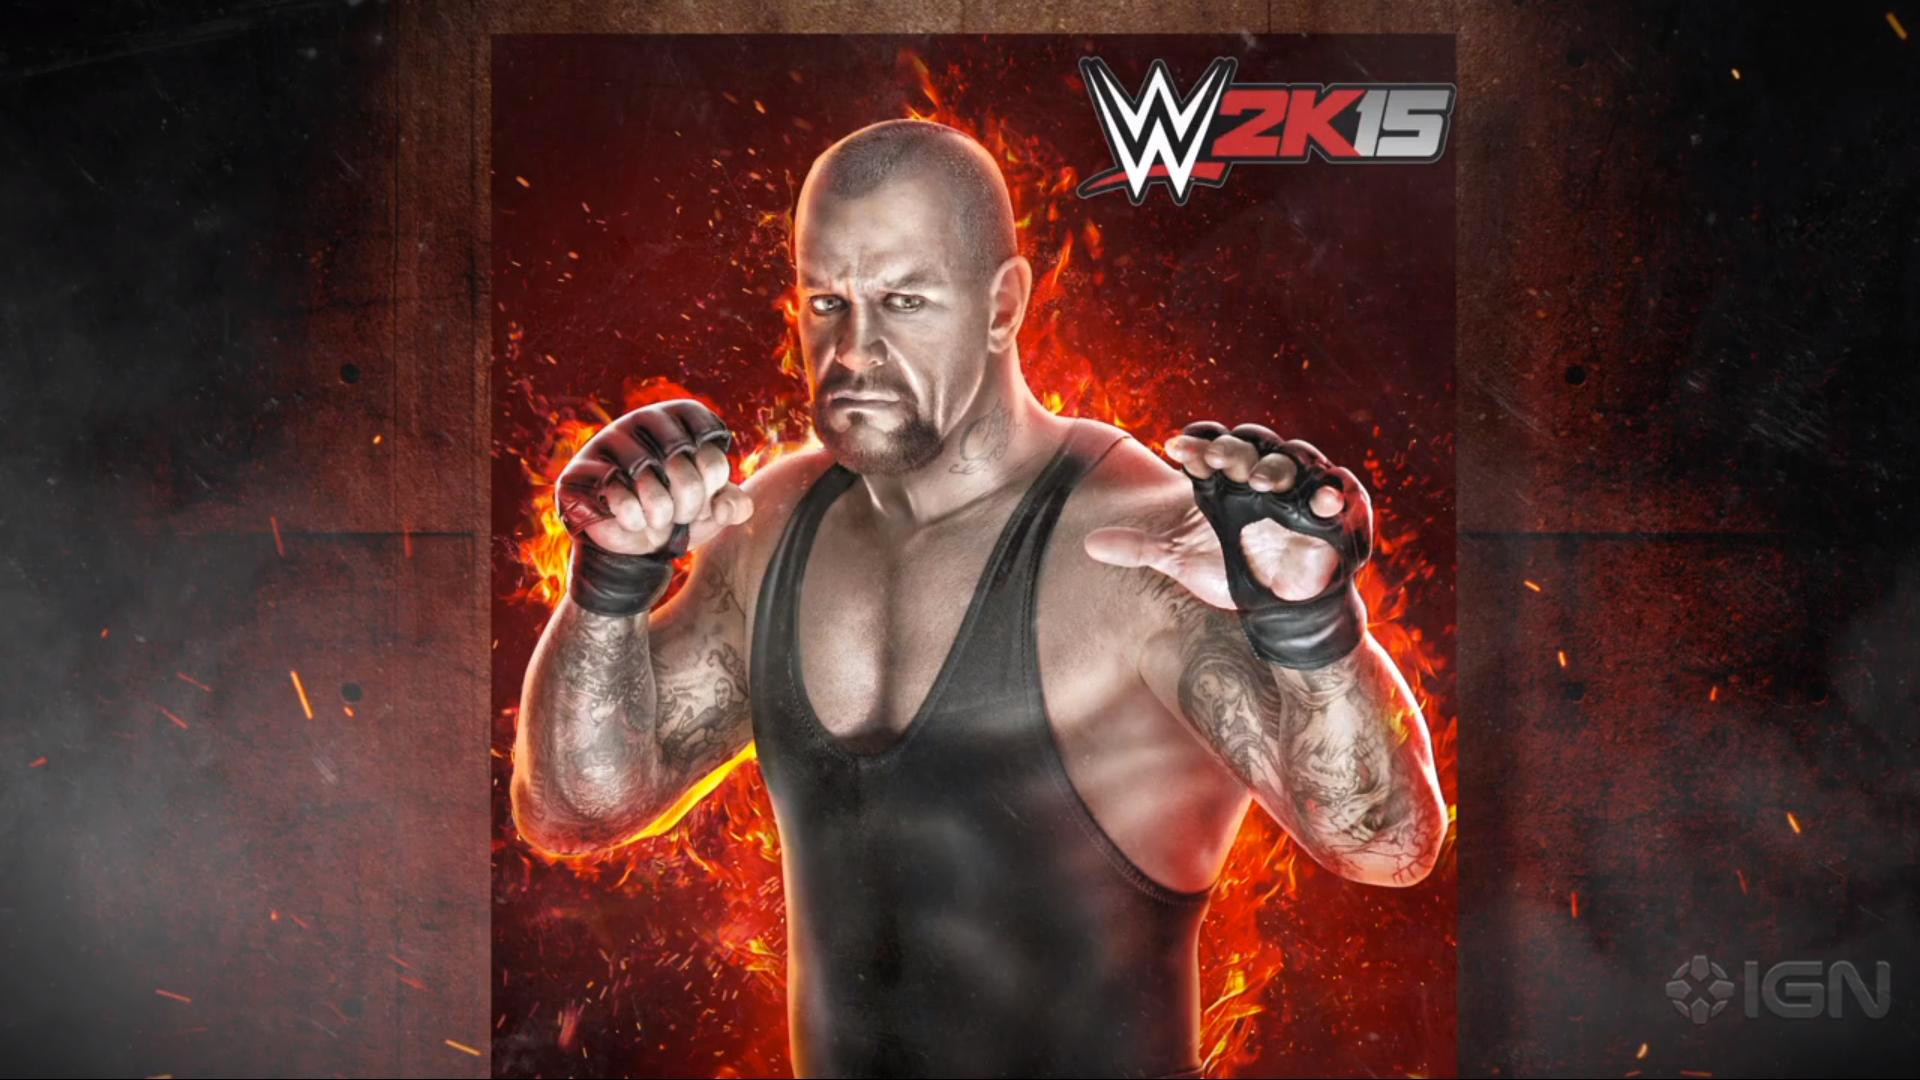 1920x1080 The Undertaker 2k15.png